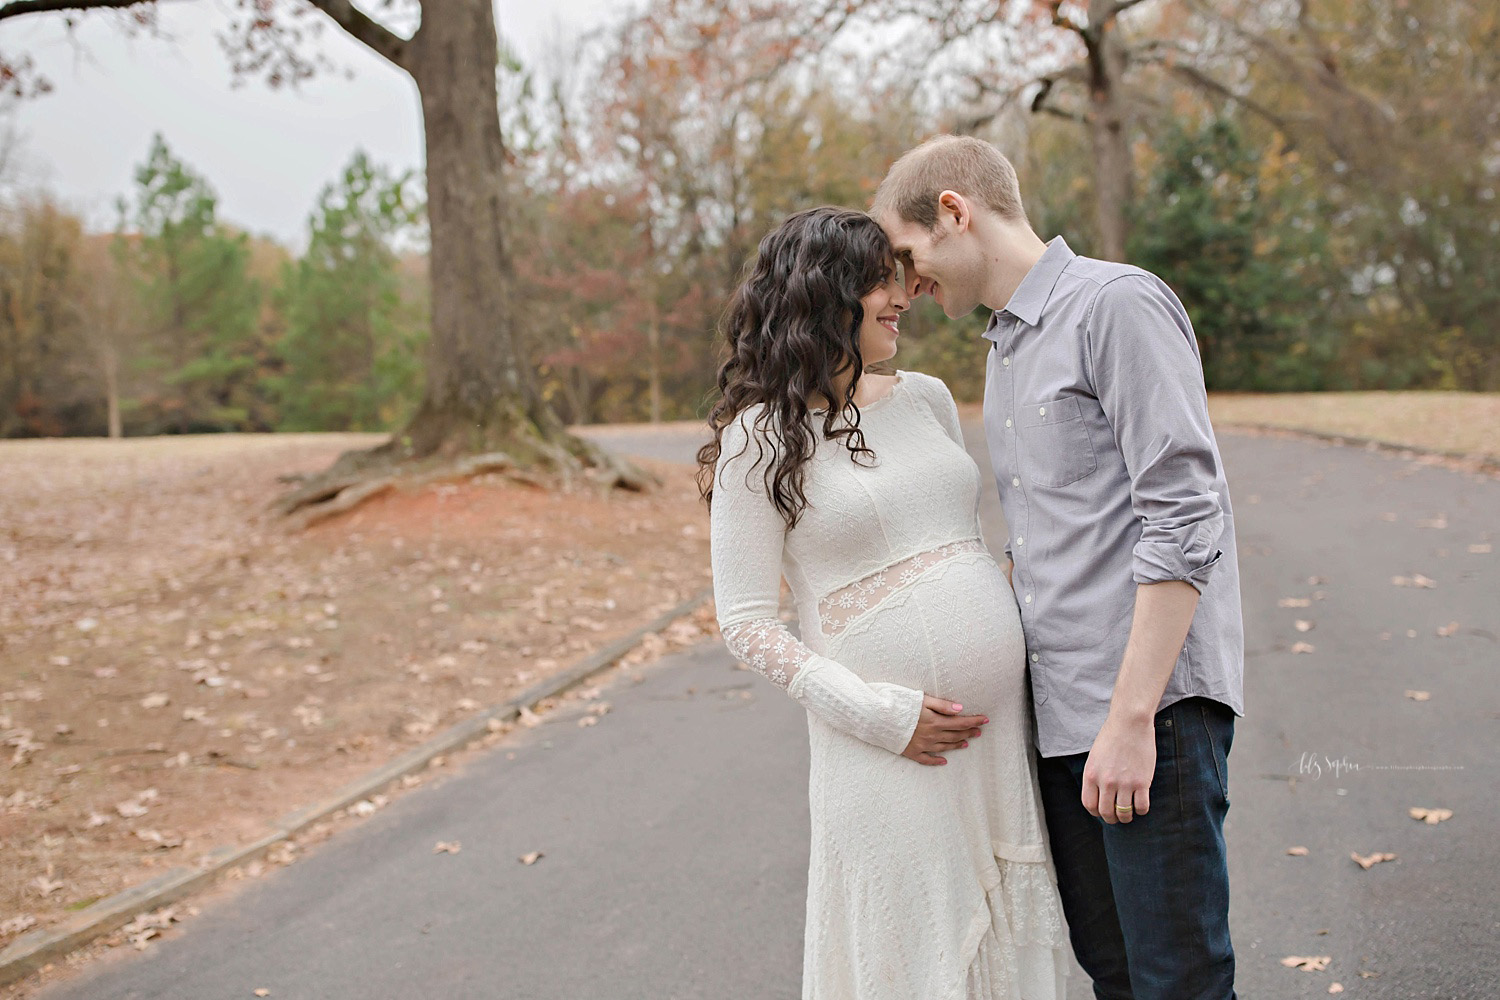 Pregnant woman in white dress nuzzling husband in local Atlanta park